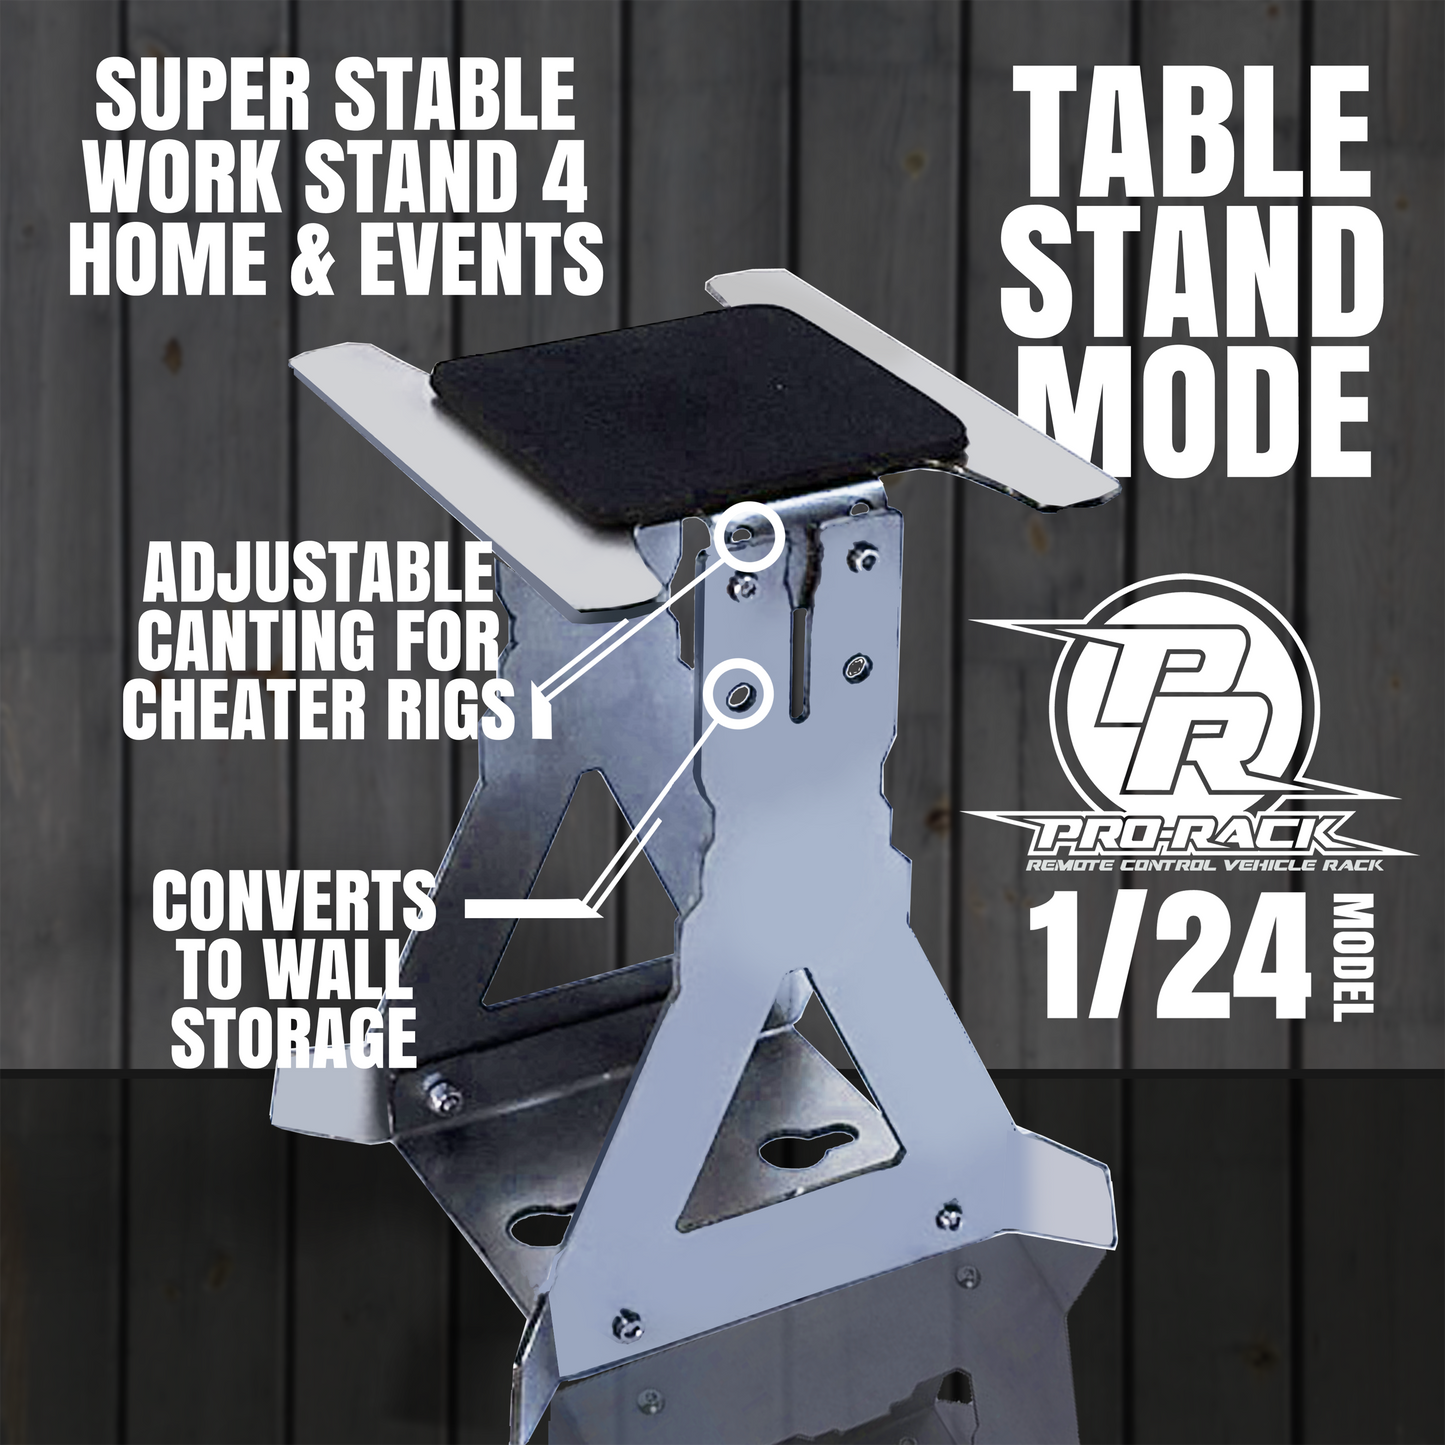 RC PRO RACK MINI ELITE 1/24 SCALE WALL STORAGE/TABLE STAND